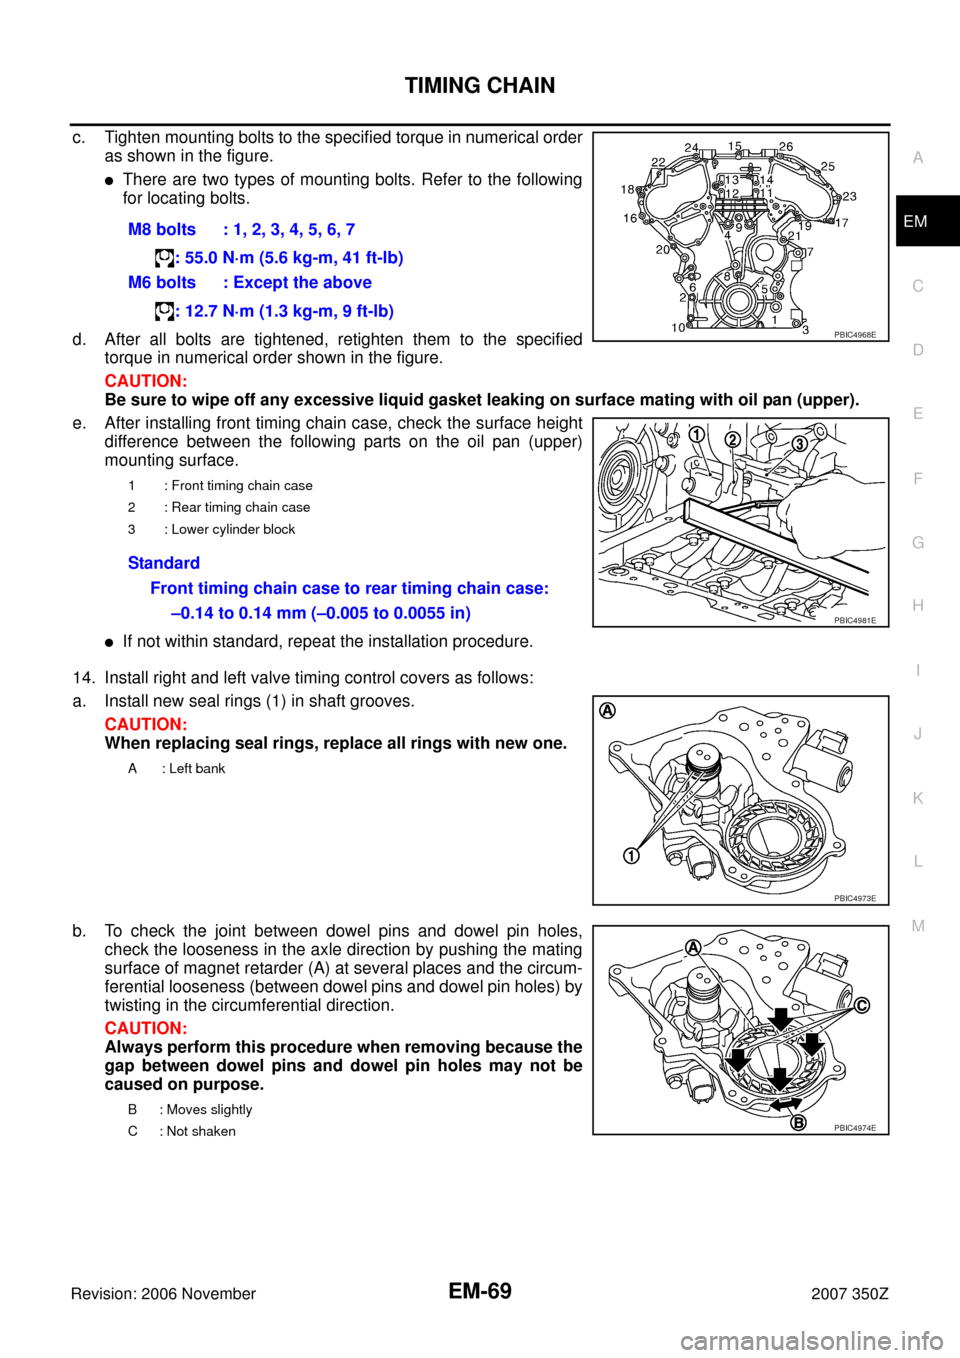 NISSAN 350Z 2007 Z33 Engine Mechanical Workshop Manual TIMING CHAIN
EM-69
C
D
E
F
G
H
I
J
K
L
MA
EM
Revision: 2006 November2007 350Z
c. Tighten mounting bolts to the specified torque in numerical order
as shown in the figure.
There are two types of mount